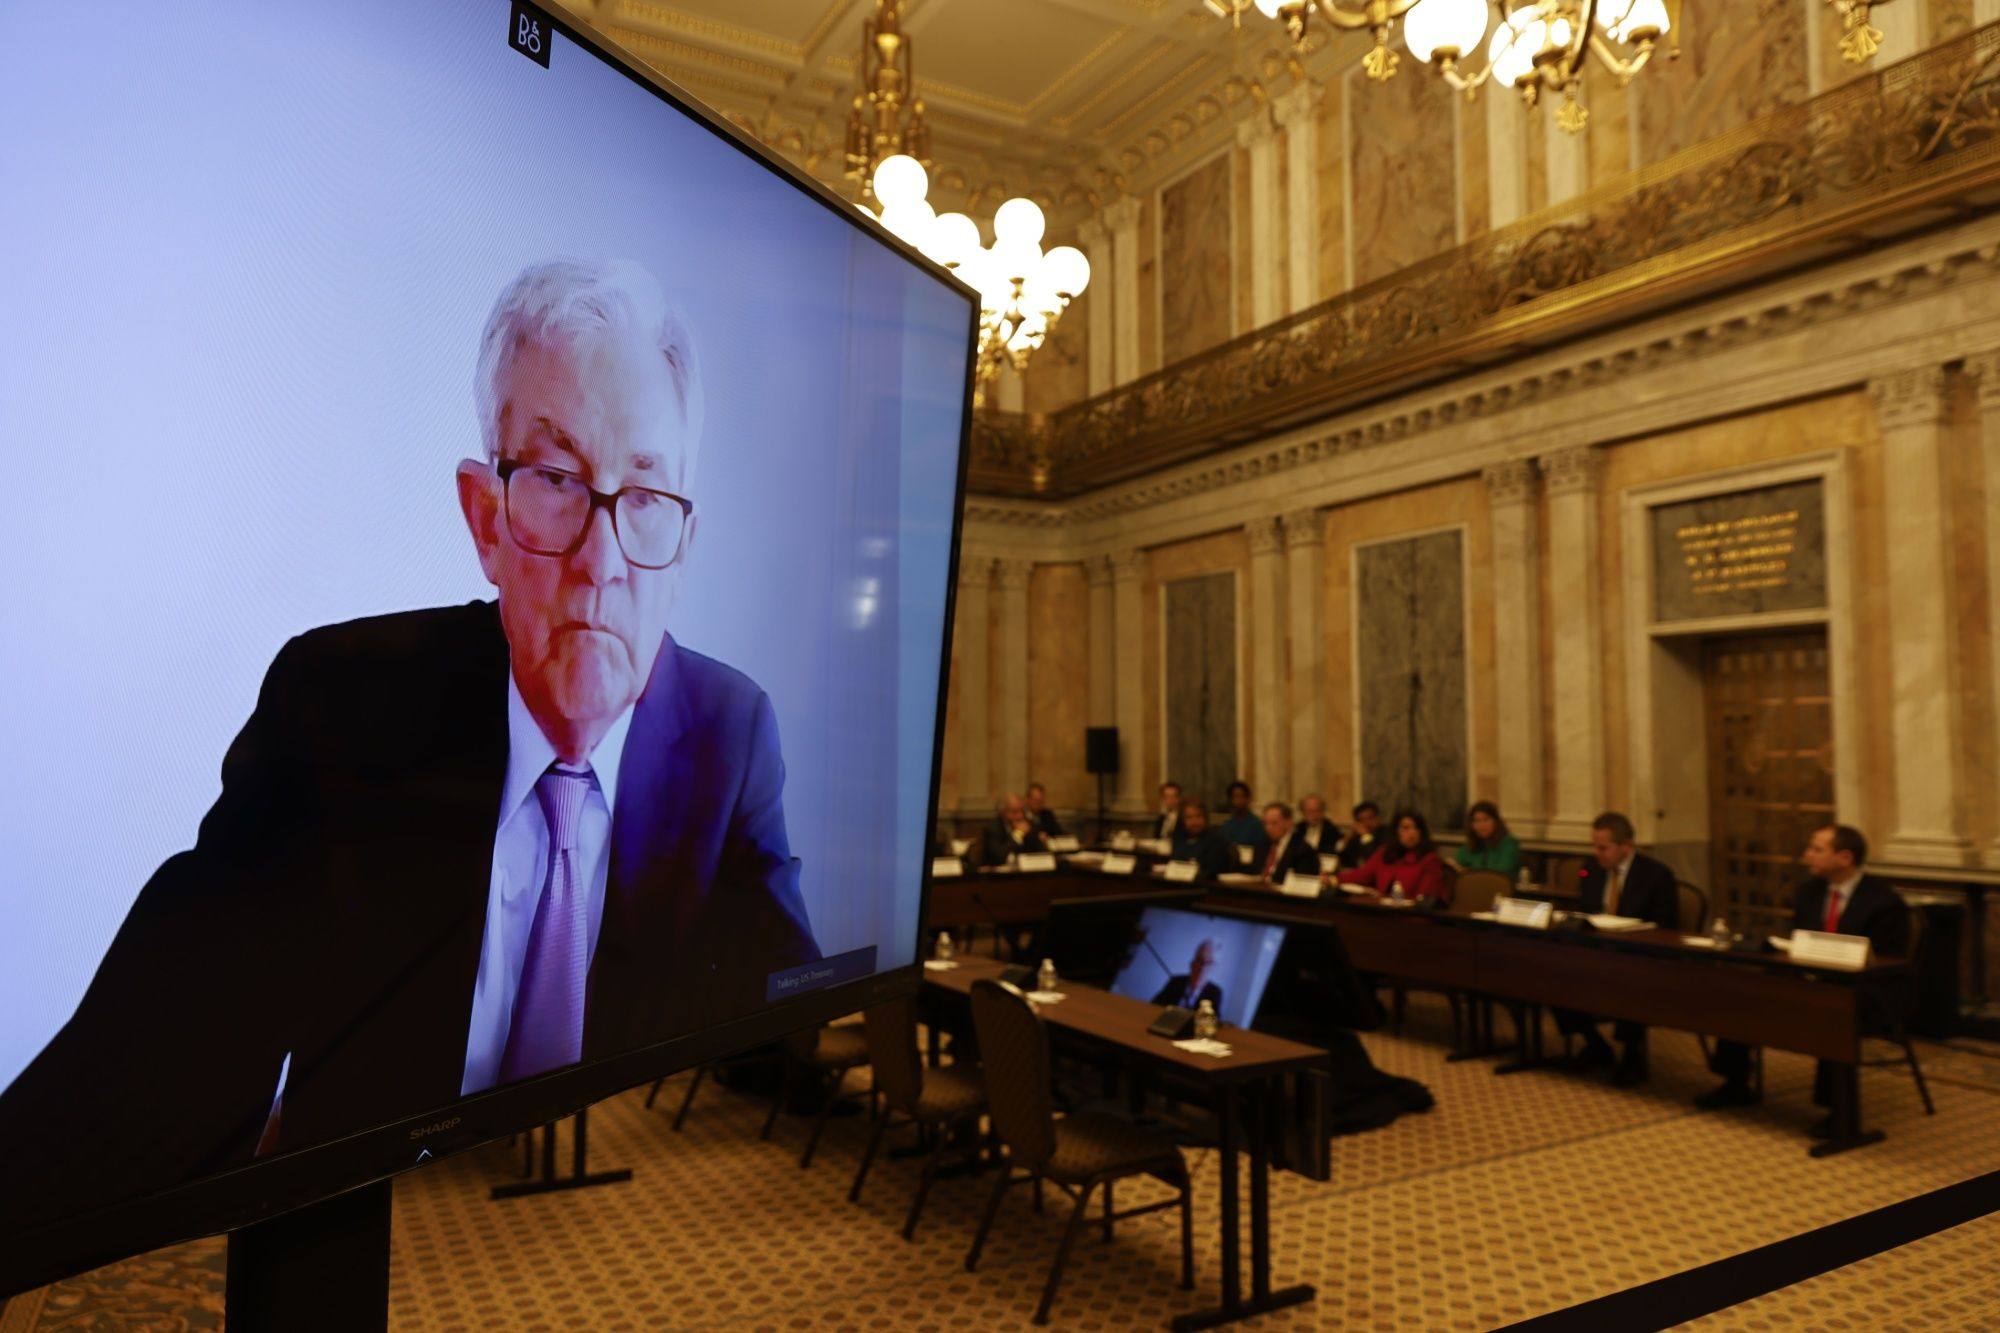 Jerome Powell, chairman of the US Federal Reserve, speaks via teleconference during a Financial Stability Oversight Council meeting at the Treasury Department in Washington on December 16, 2022. Photo: Bloomberg